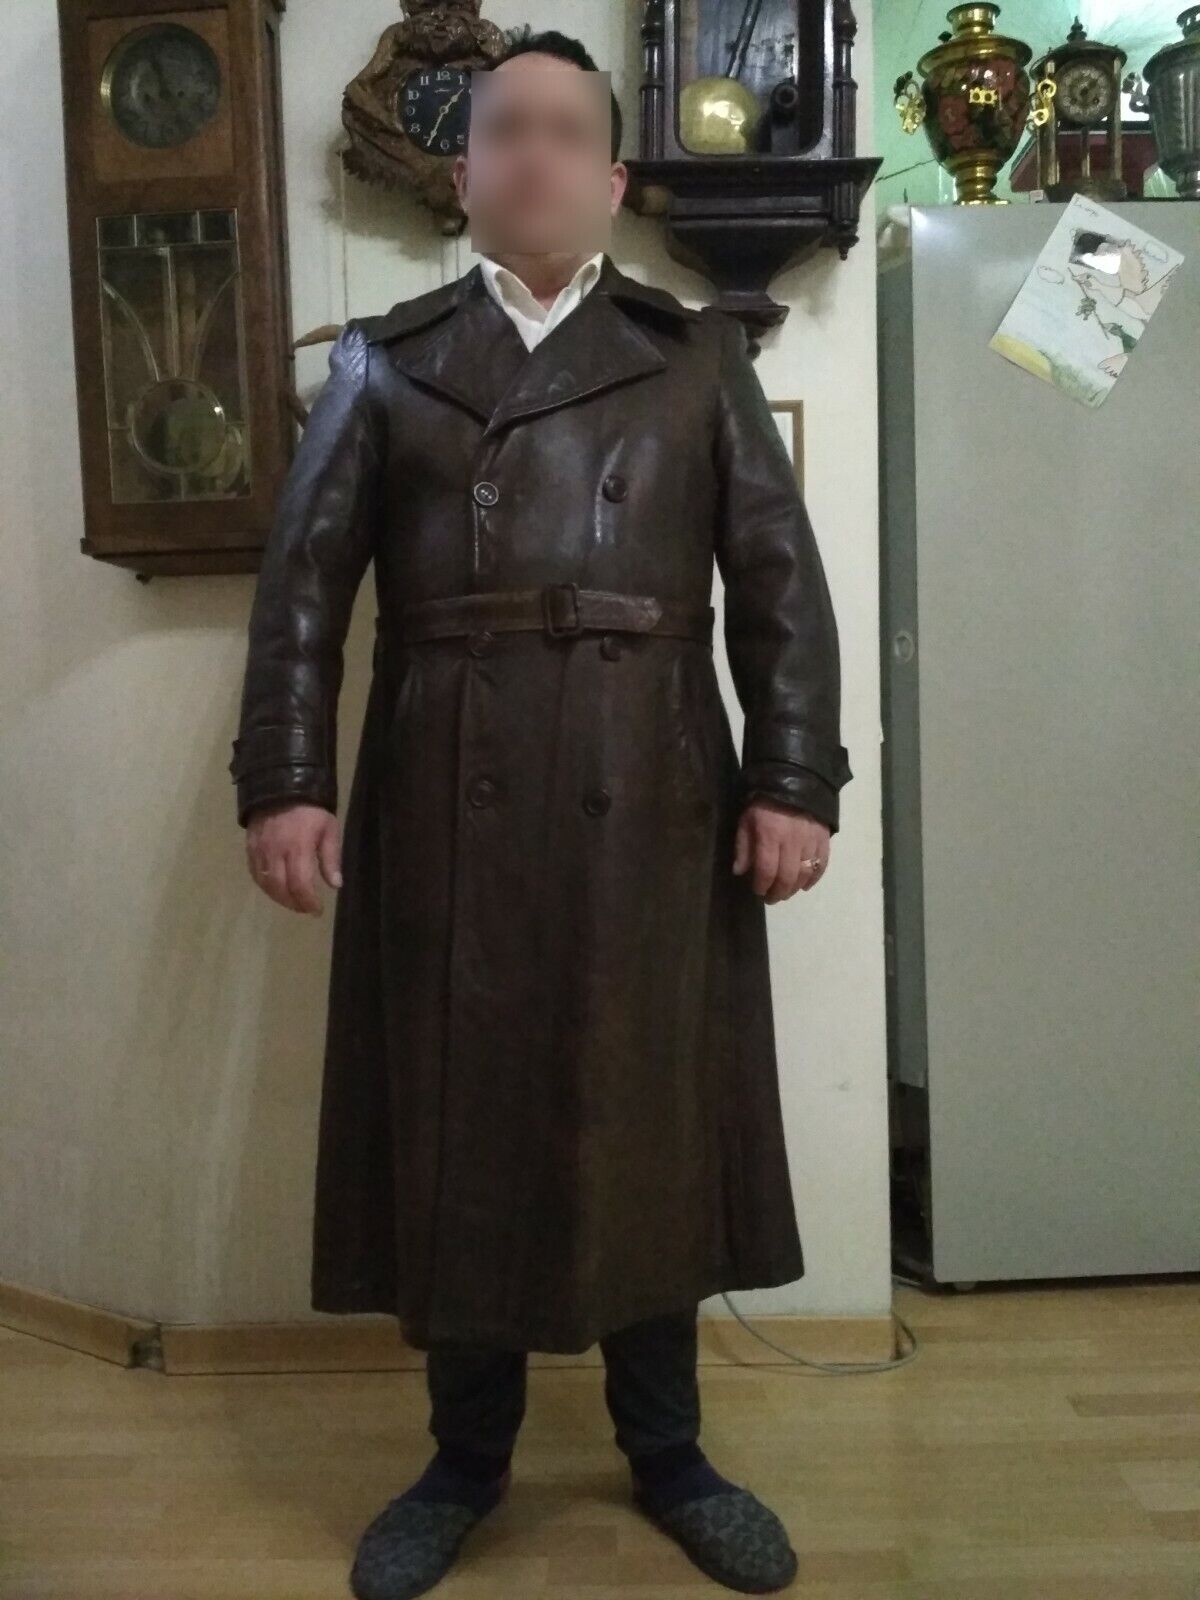 Old leather coat of an English pilot in 1943. Original.